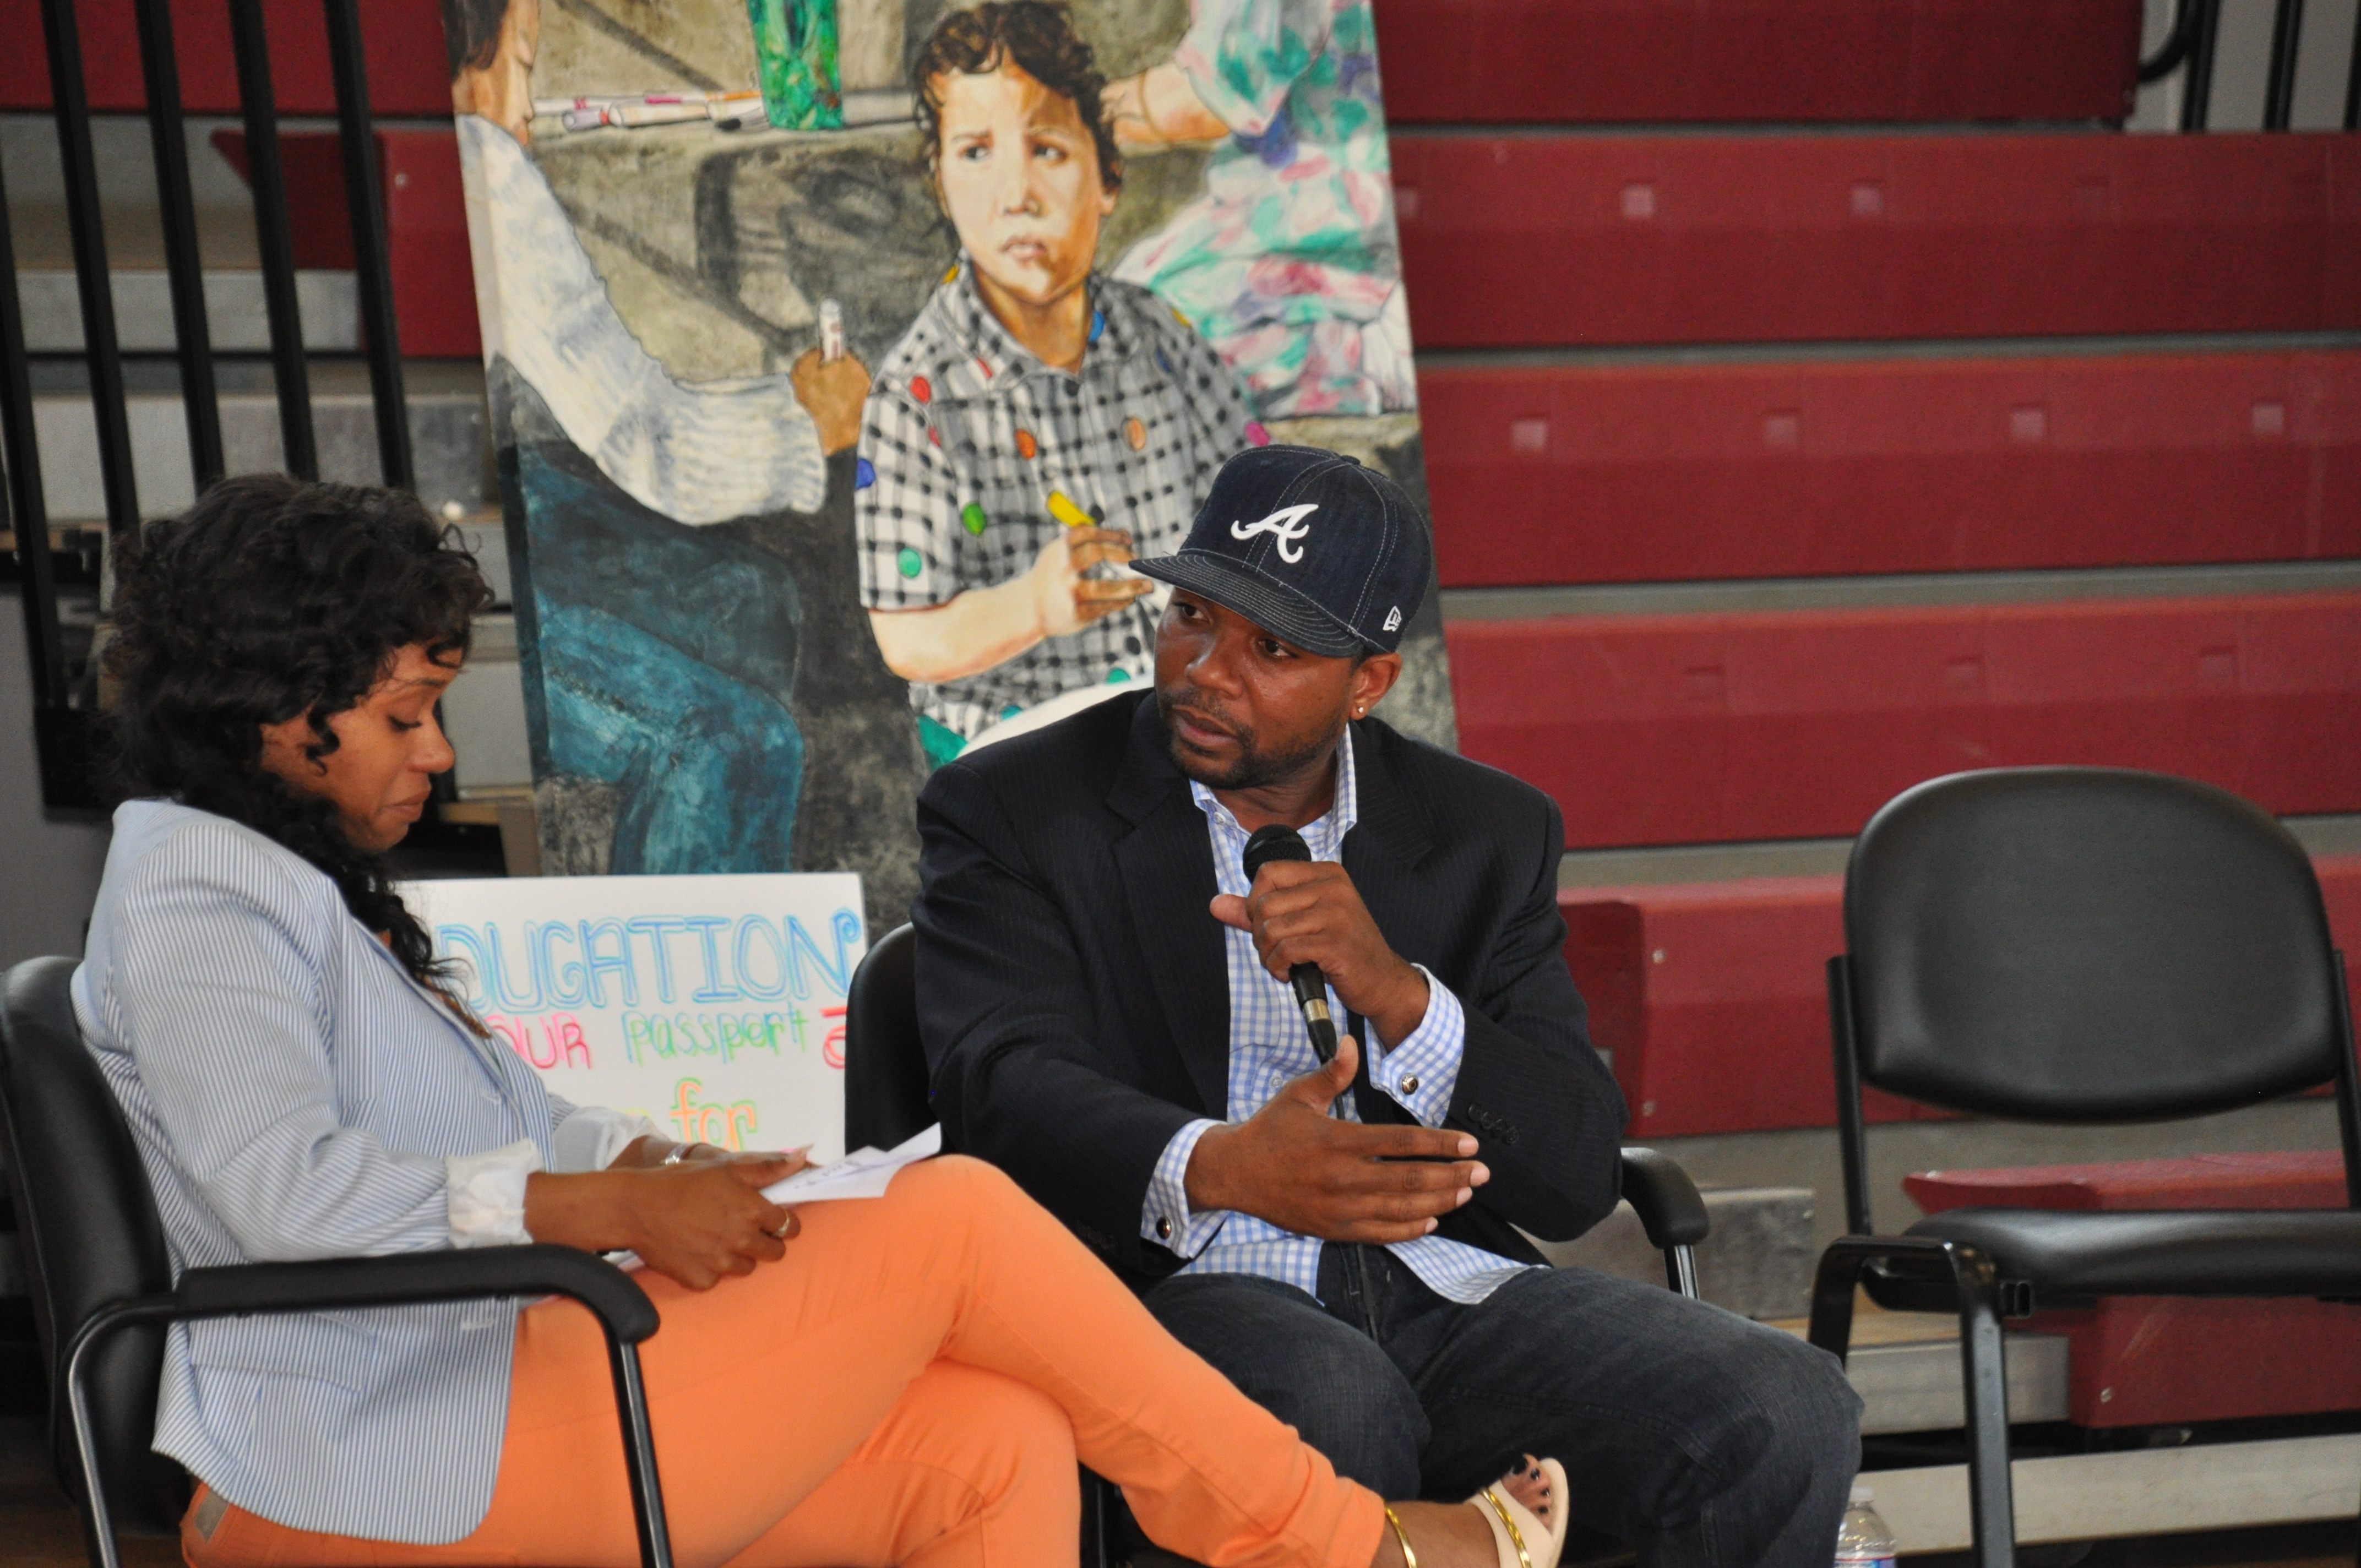 Grammy-award-winning producer/songwriter Carvin Haggins (right) answers a question from Syreeta Martin, journalist and consultant (left), during a question-and-answer session at Chester Community Char